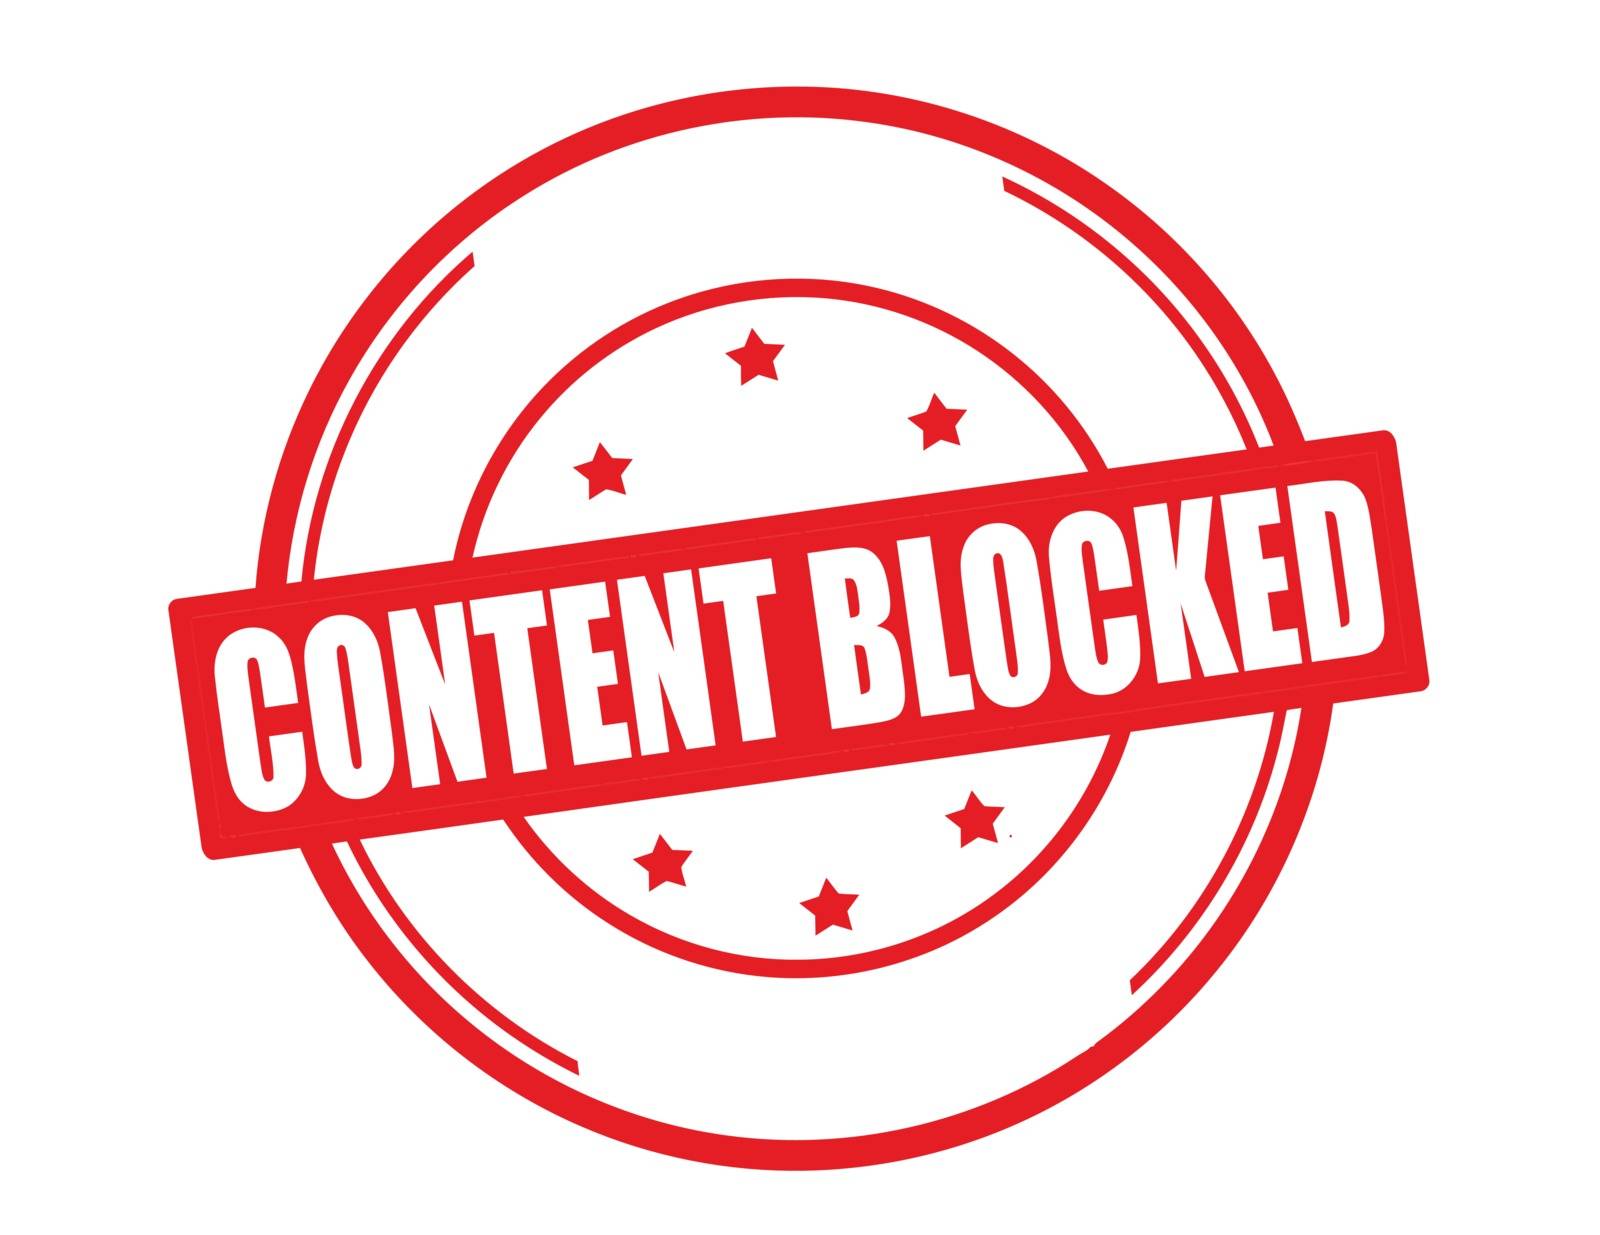 Content blocked by carmenbobo